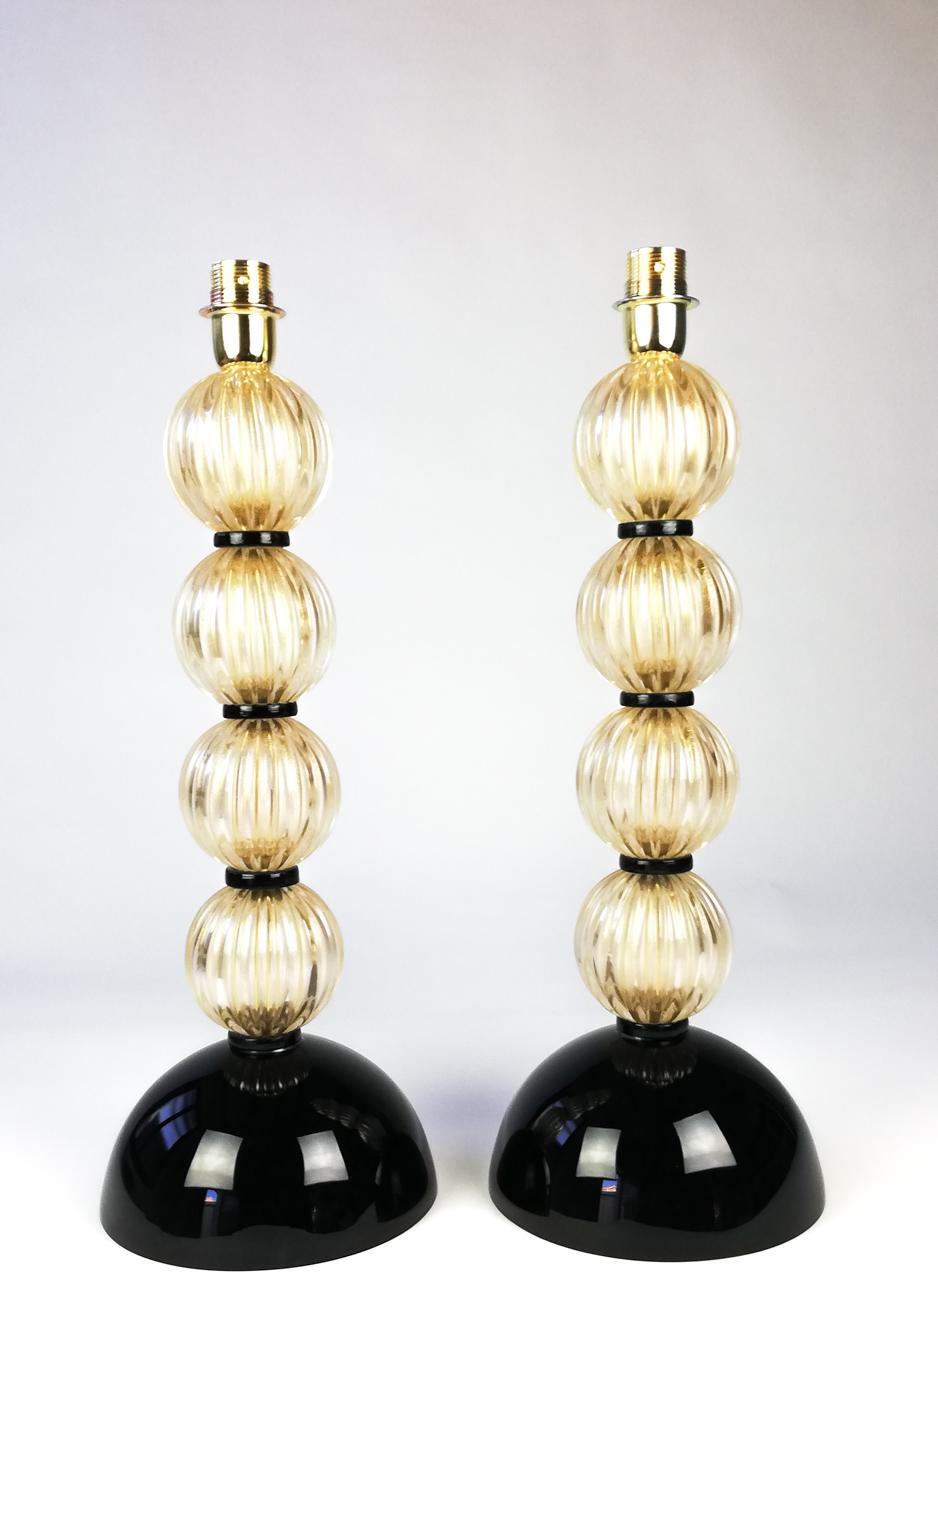 Donà Furnace Mid-Century Modern Gold Black Two of Murano Glass Table Lamps, 1985 For Sale 9